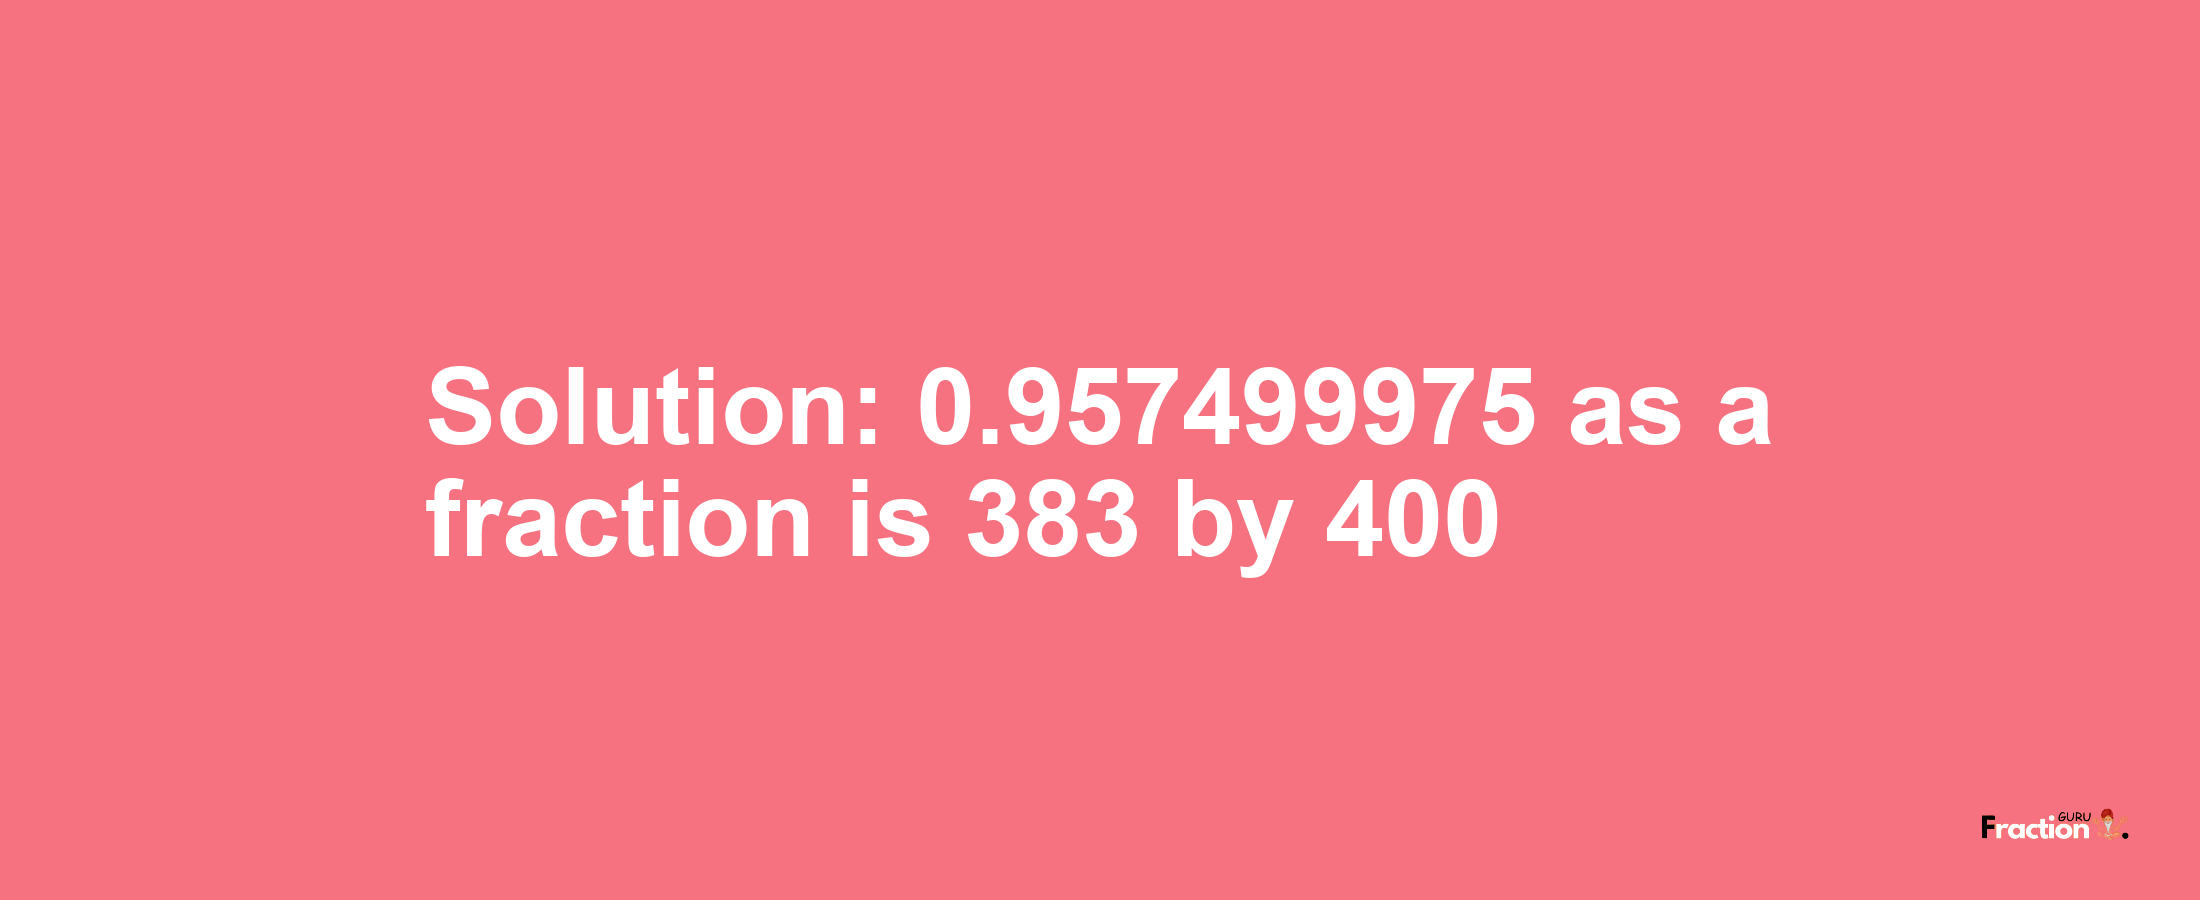 Solution:0.957499975 as a fraction is 383/400